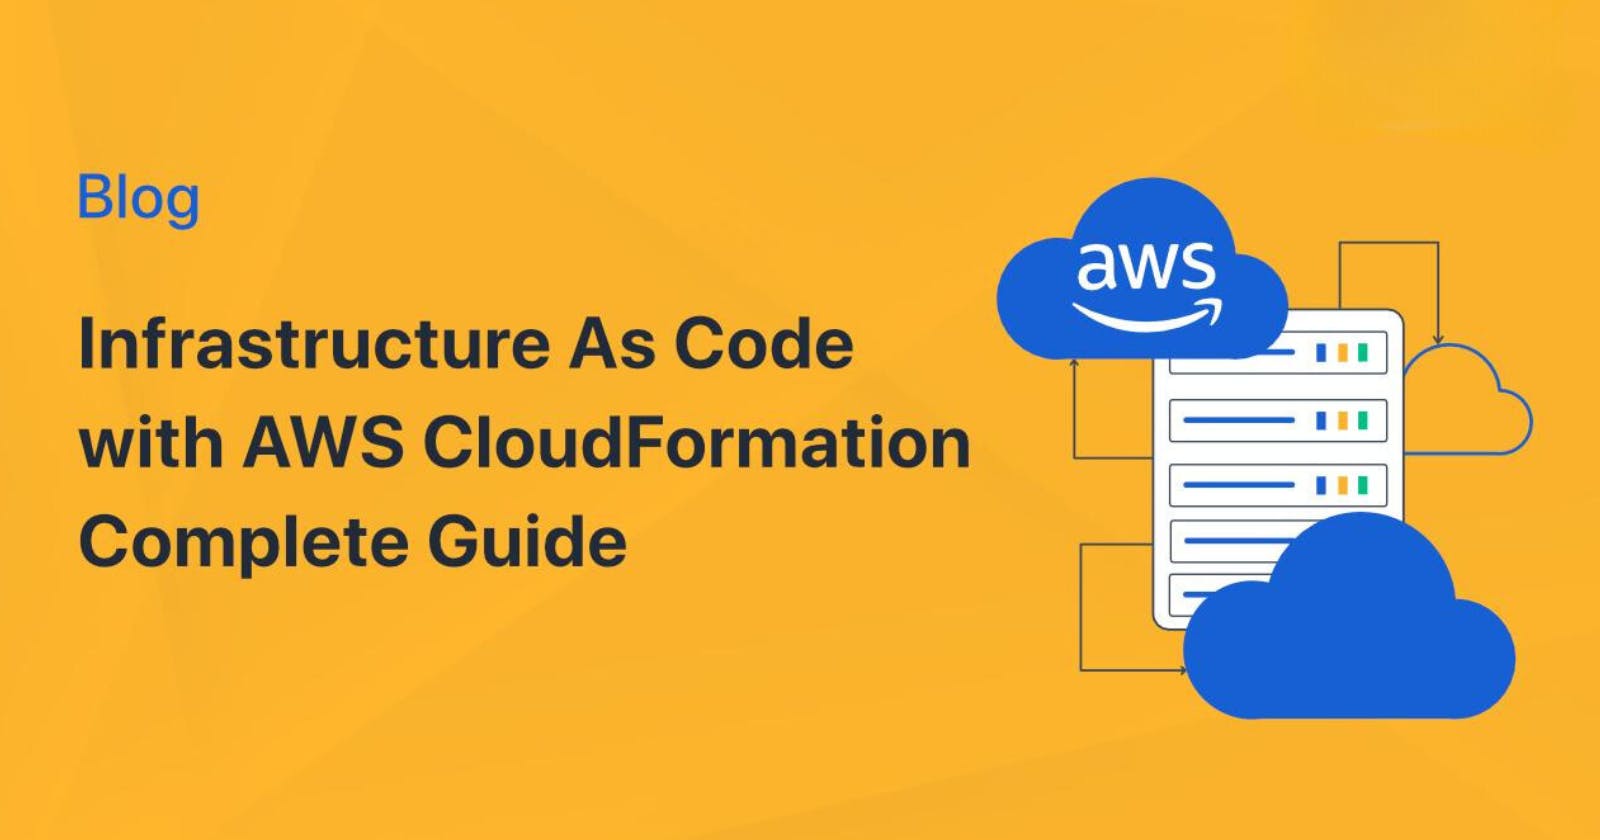 Infrastructure as code with AWS CloudFormation and related services